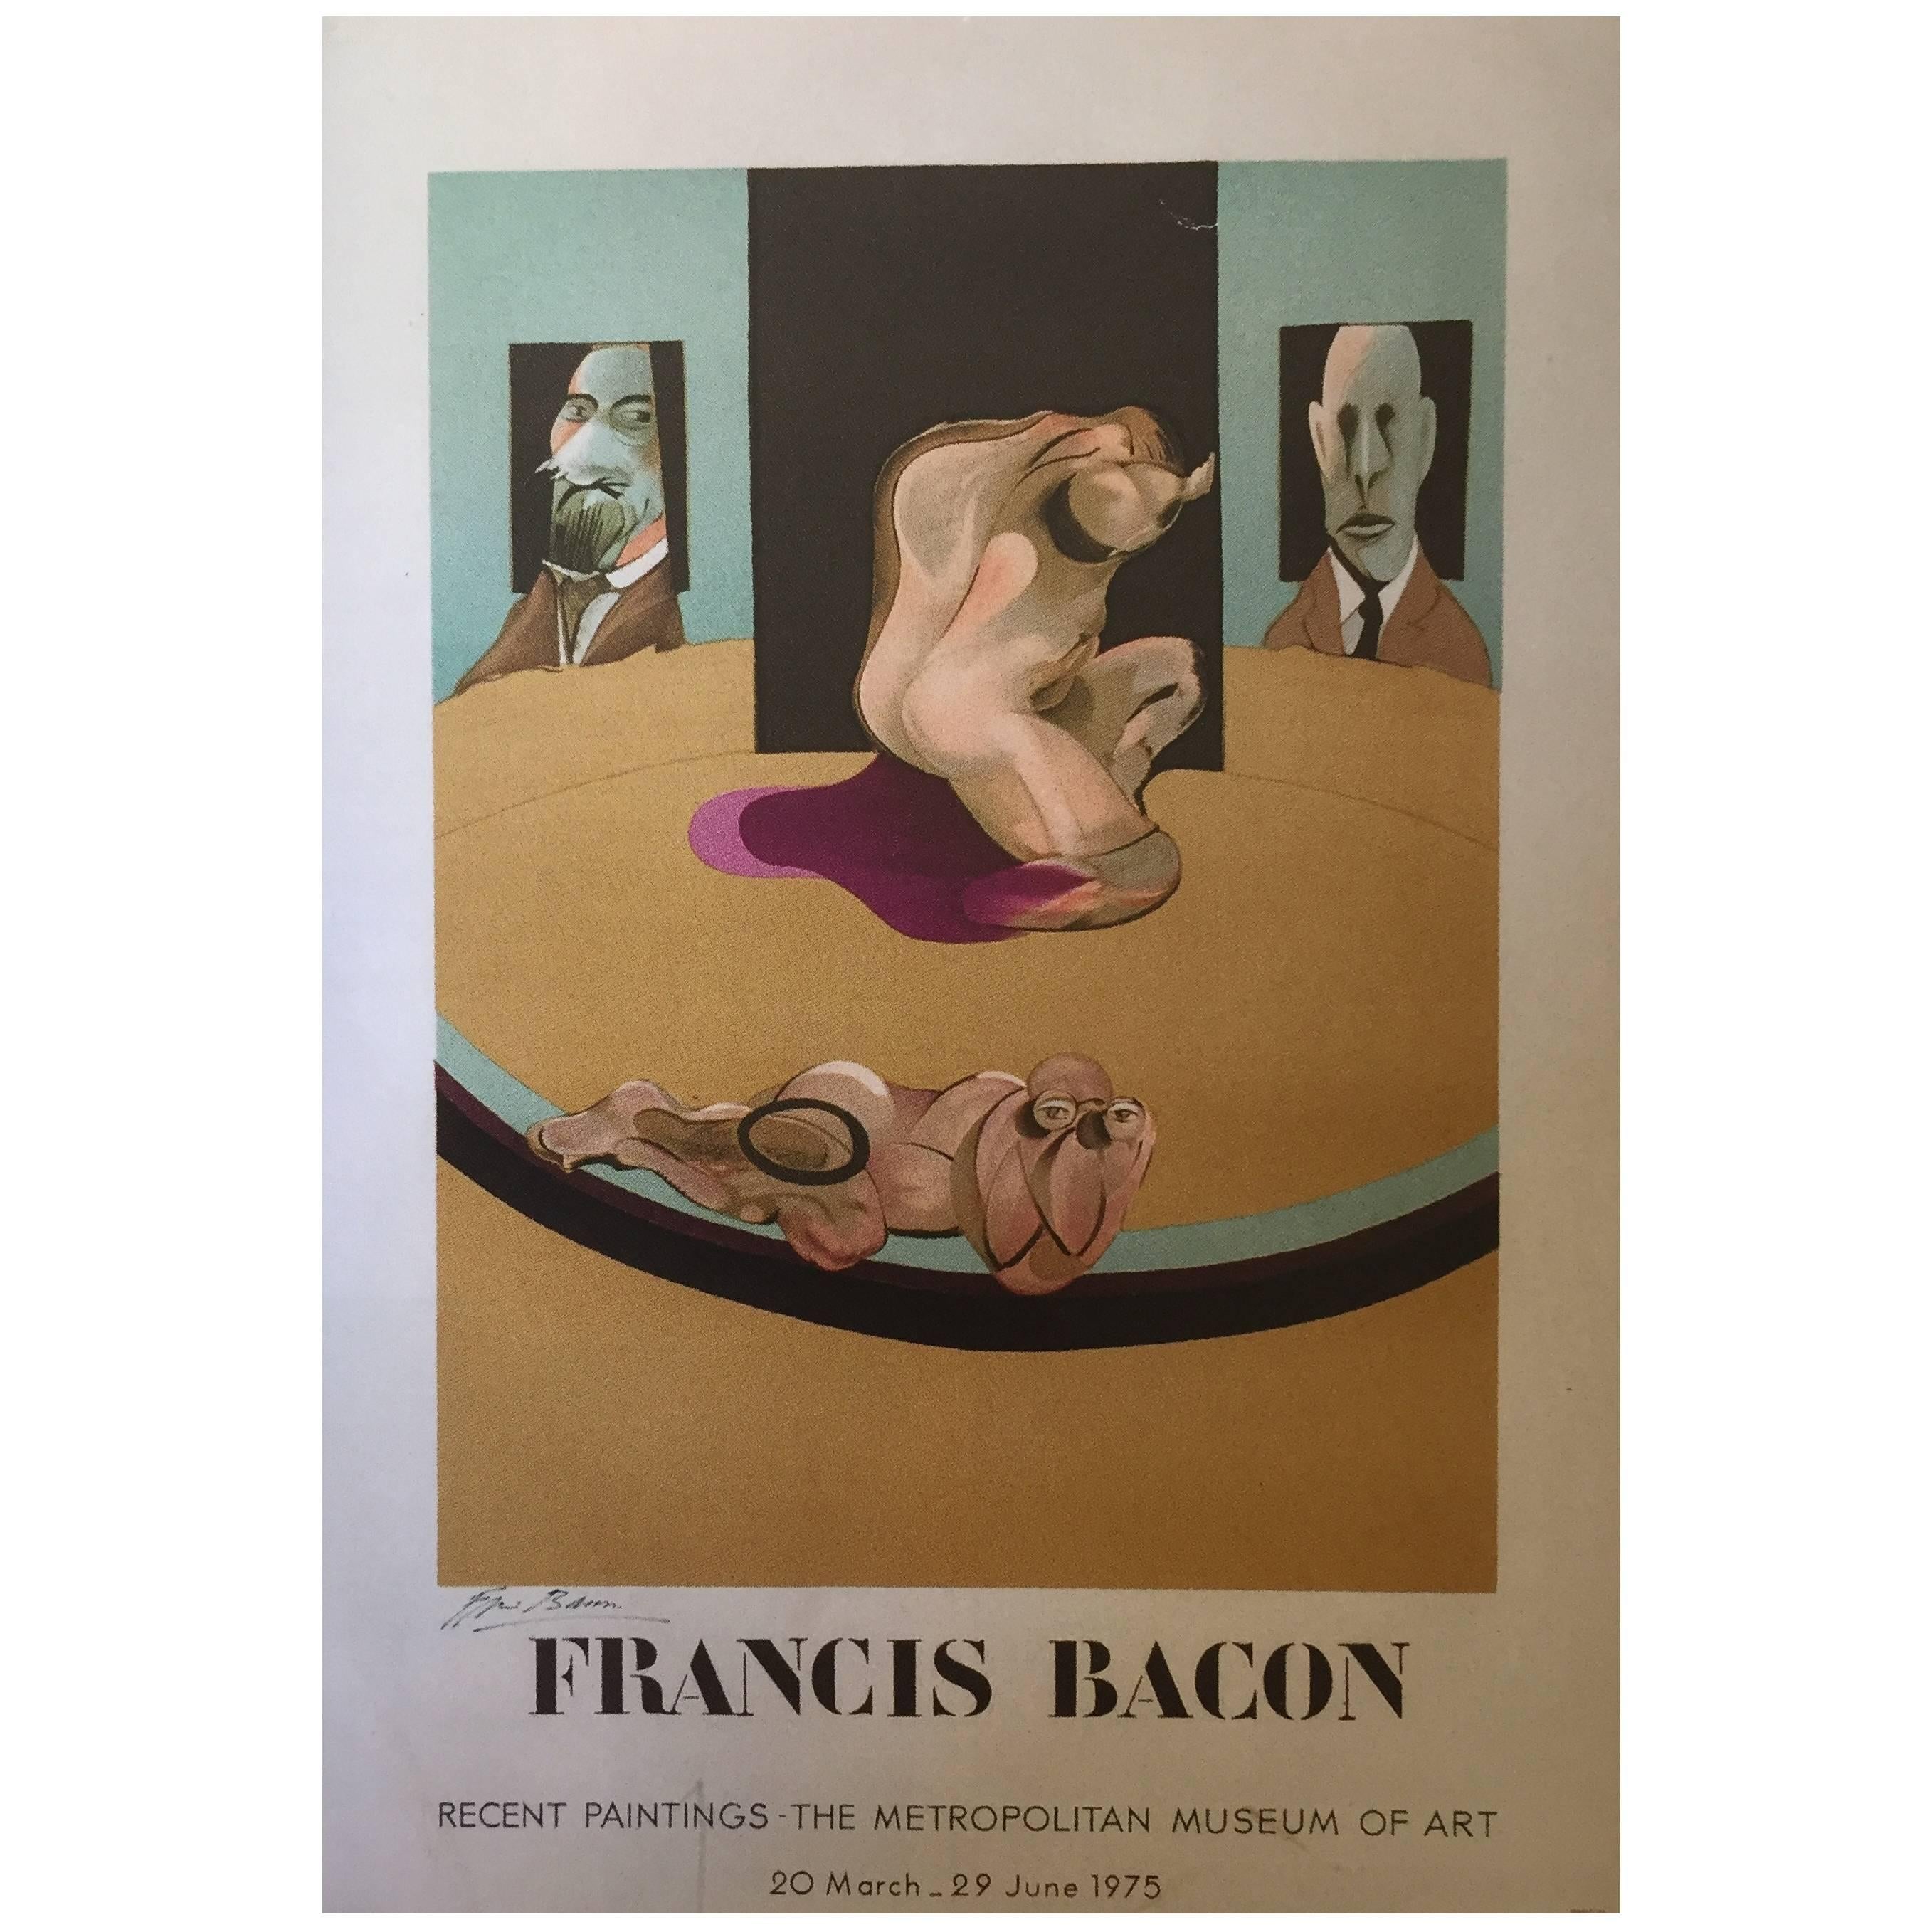 Francis Bacon Lithograph Poster, Signed and Numbered 91/200